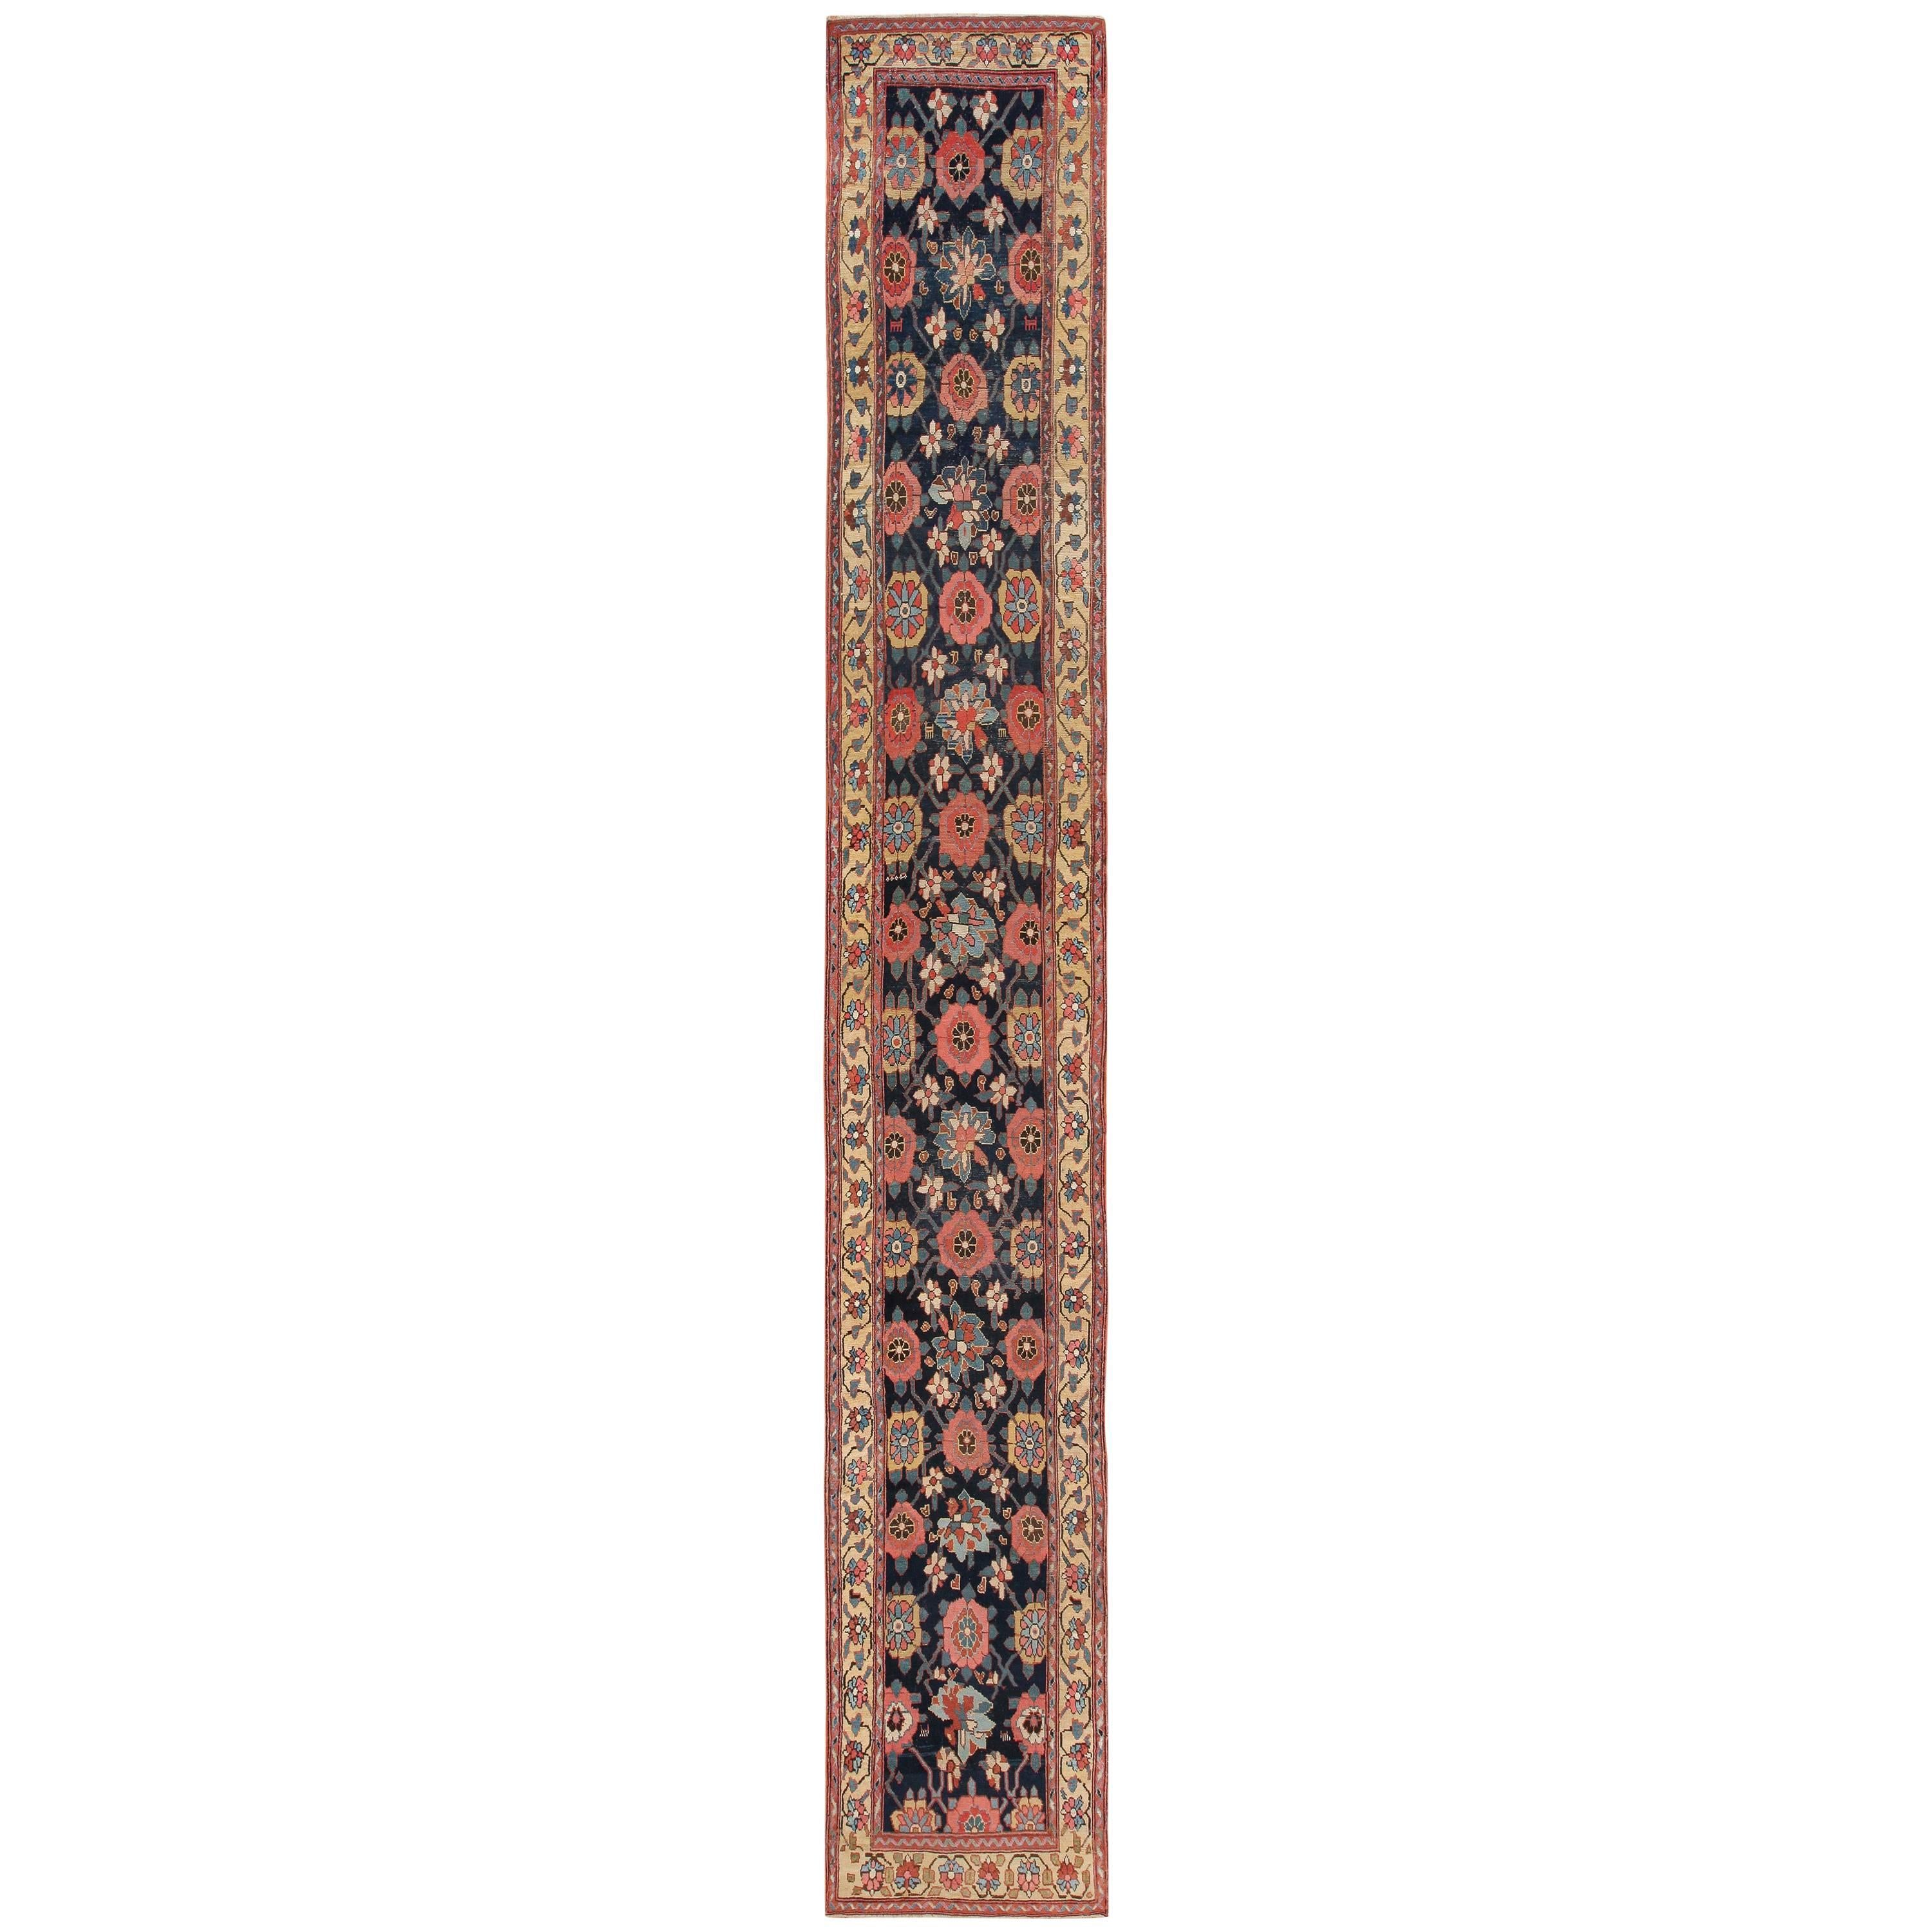 Early 19th Century Tribal Persian Northwest Runner Rug. Size: 2 ft 10 in x 19 ft